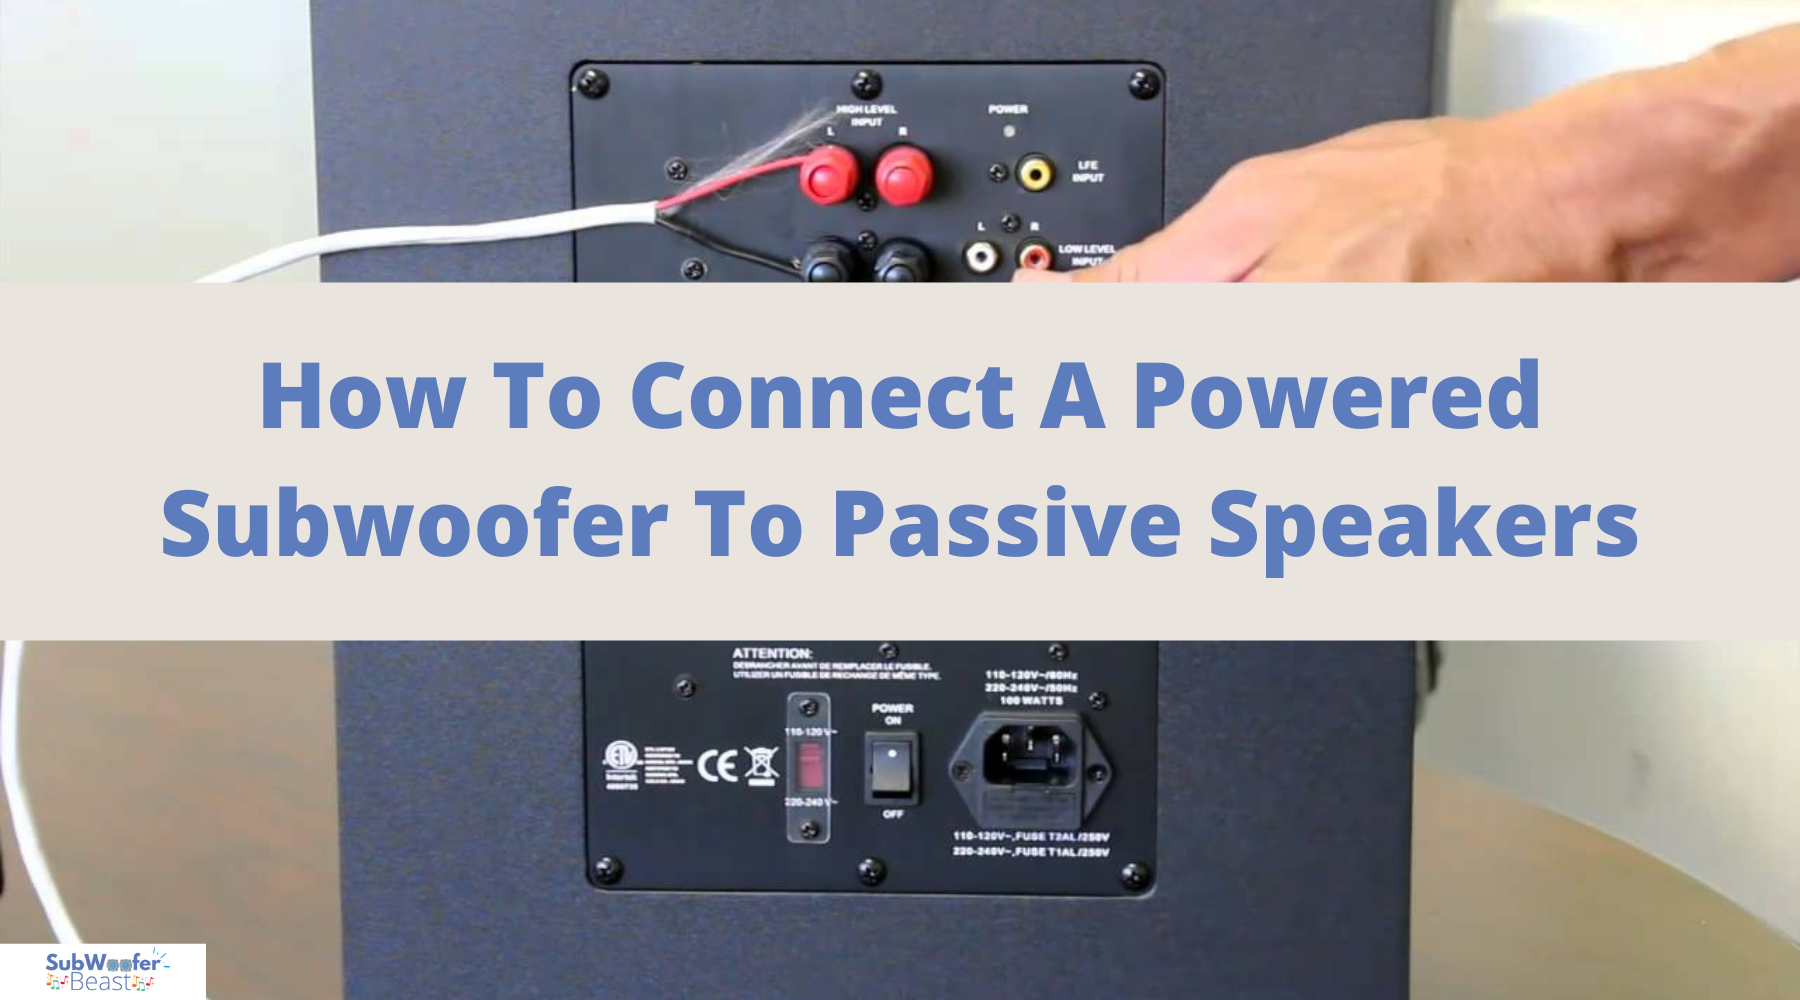 How To Connect A Powered Subwoofer To Passive Speakers